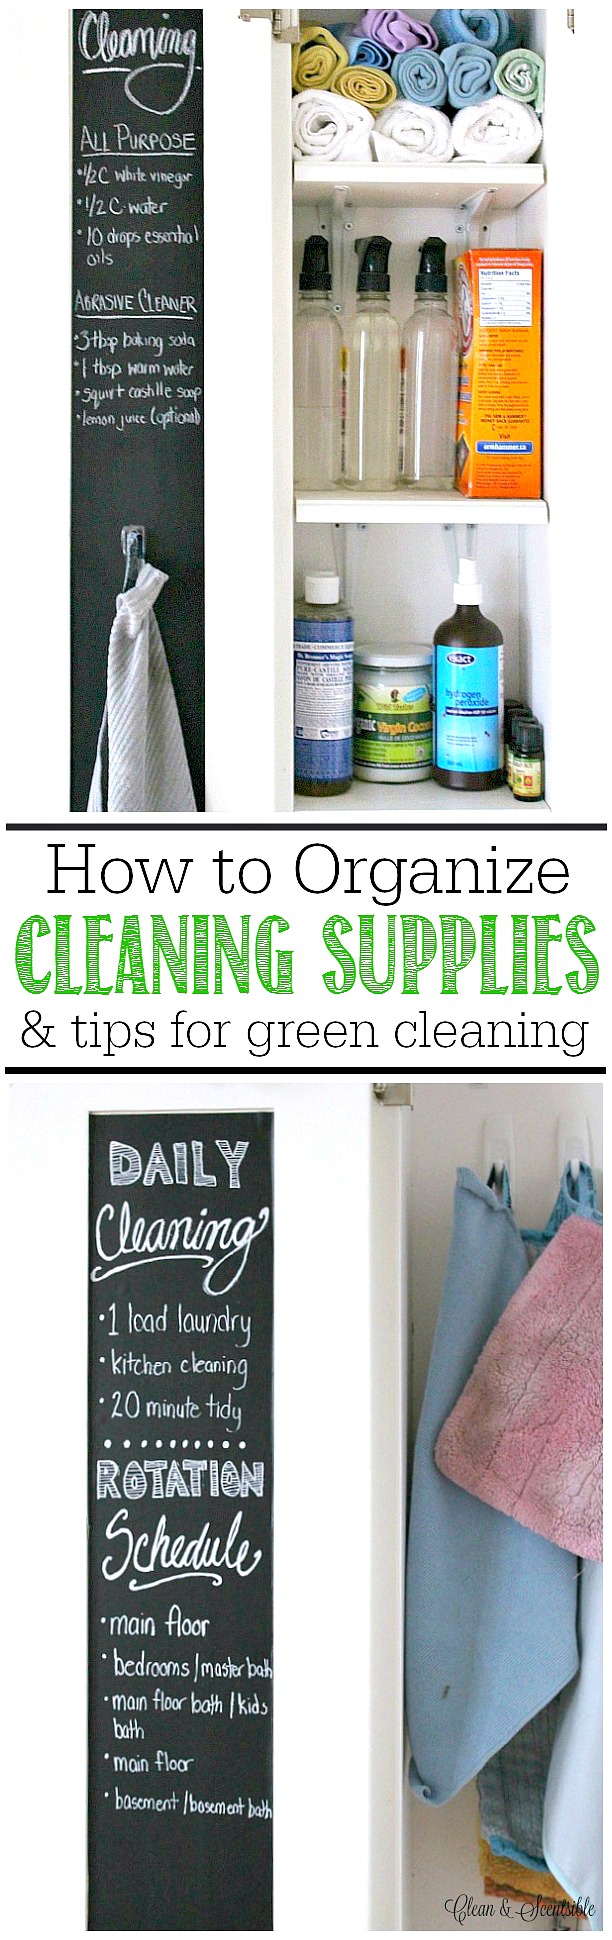 How to organize cleaning supplies and tips for green cleaning.